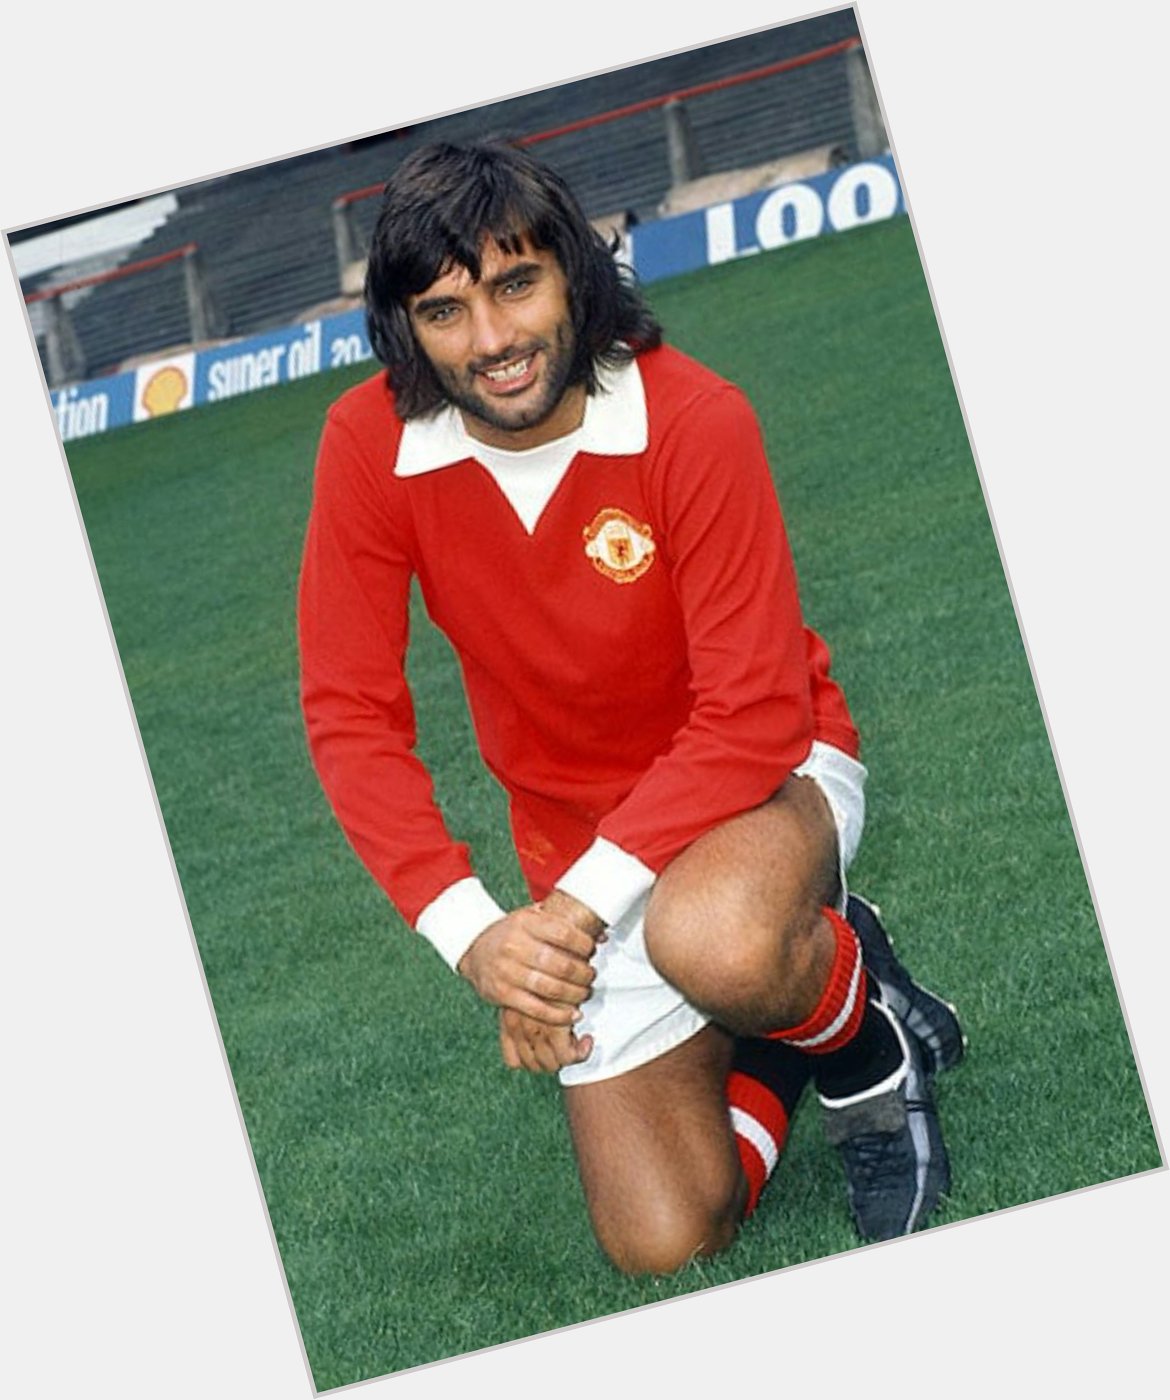 May22nd 1946. Arguably the greatest player ever. Footballing genius and icon. Happy heavenly birthday George Best. 